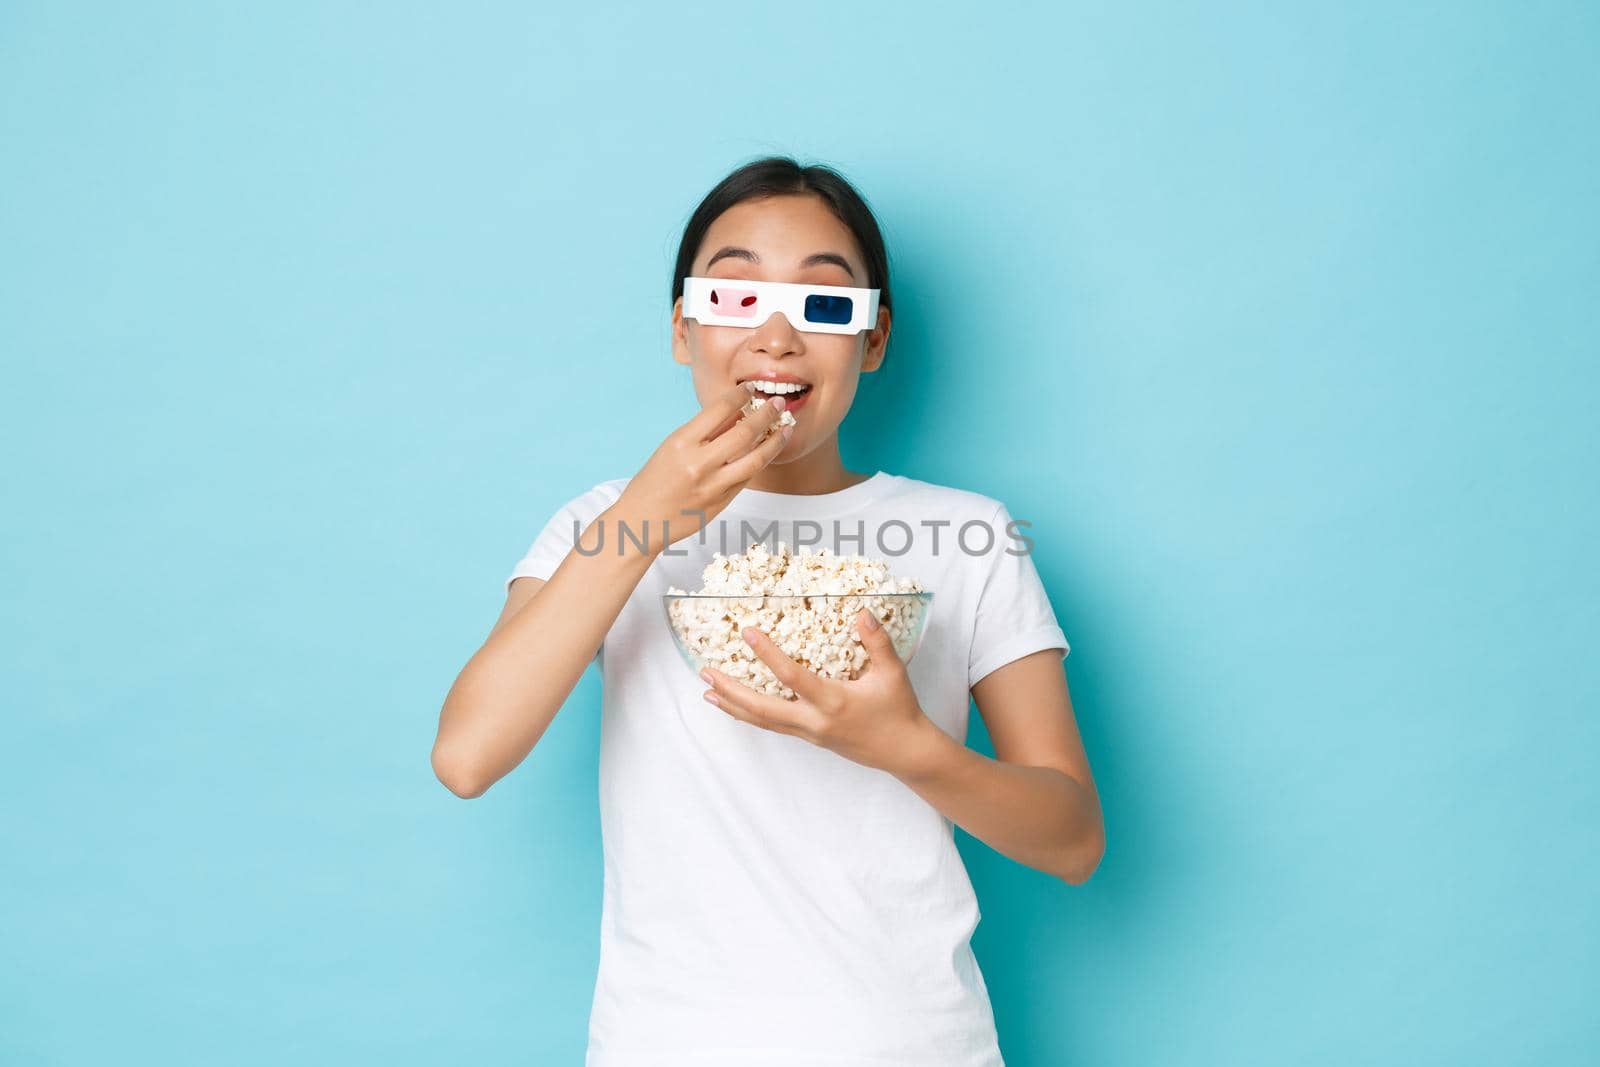 Lifestyle, leisure and emotions concept. Young excited asian girl watching premier of favorite movie, wearing 3d glasses and eating popcorn with thrilled expression, standing light blue background.